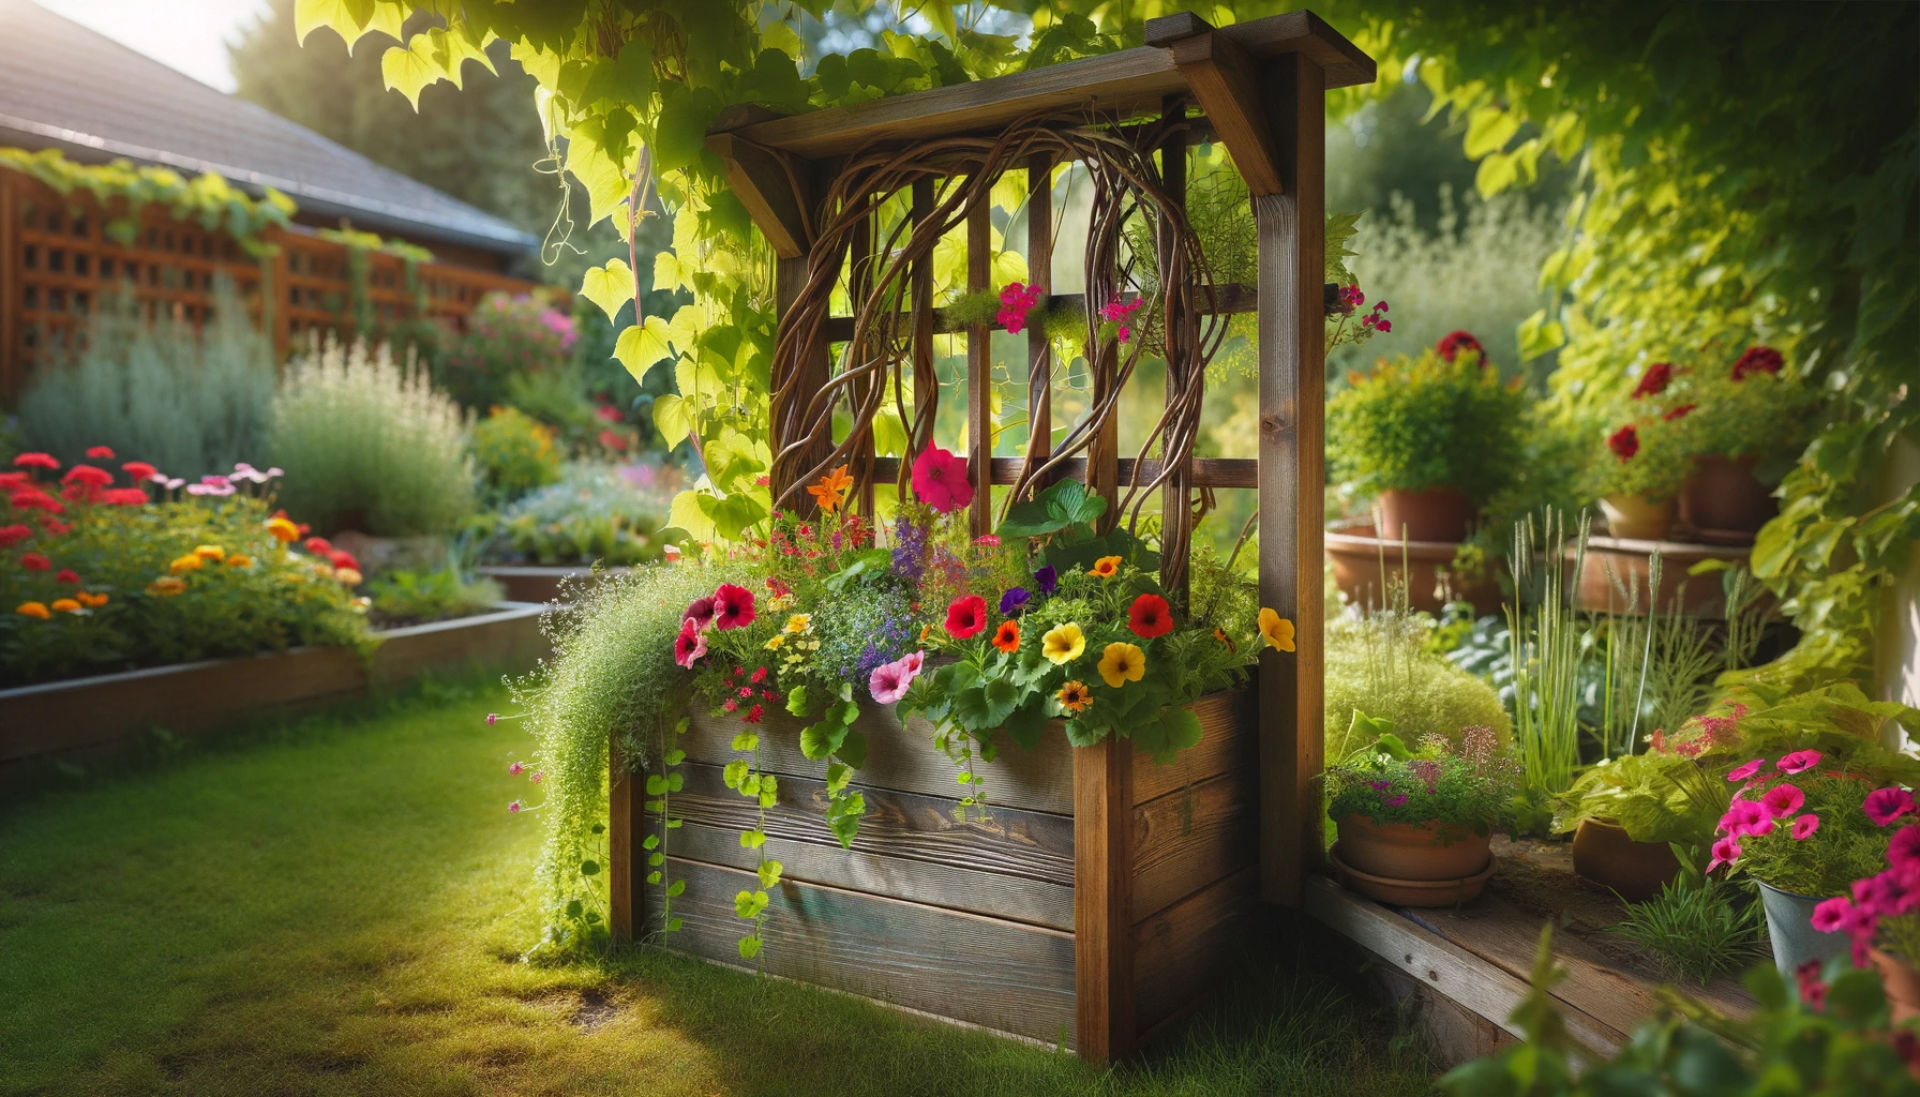 Wooden Planters Trellis: This image depicts a rustic wooden planter with a built-in trellis, filled with vibrant climbing vines and colorful flowers. Set in a small, lush garden corner, it exudes a peaceful and inviting oasis, with sunlight filtering through the leaves. The background provides a glimpse of a harmonious garden setting.